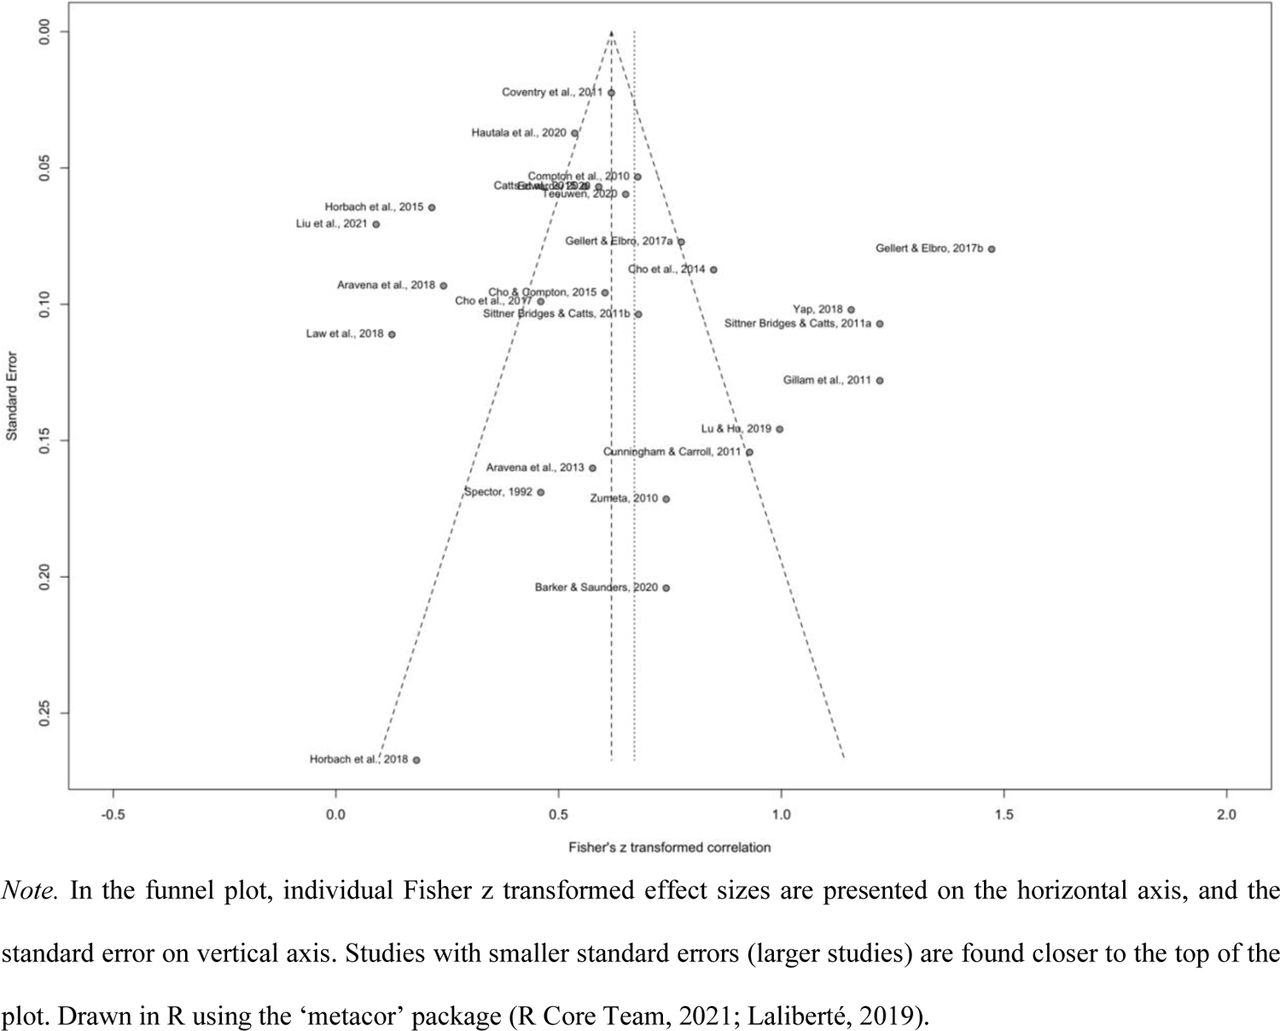 The Use of Dynamic Assessment for the Diagnosis of Language Disorders in  Bilingual Children: A Meta-Analysis